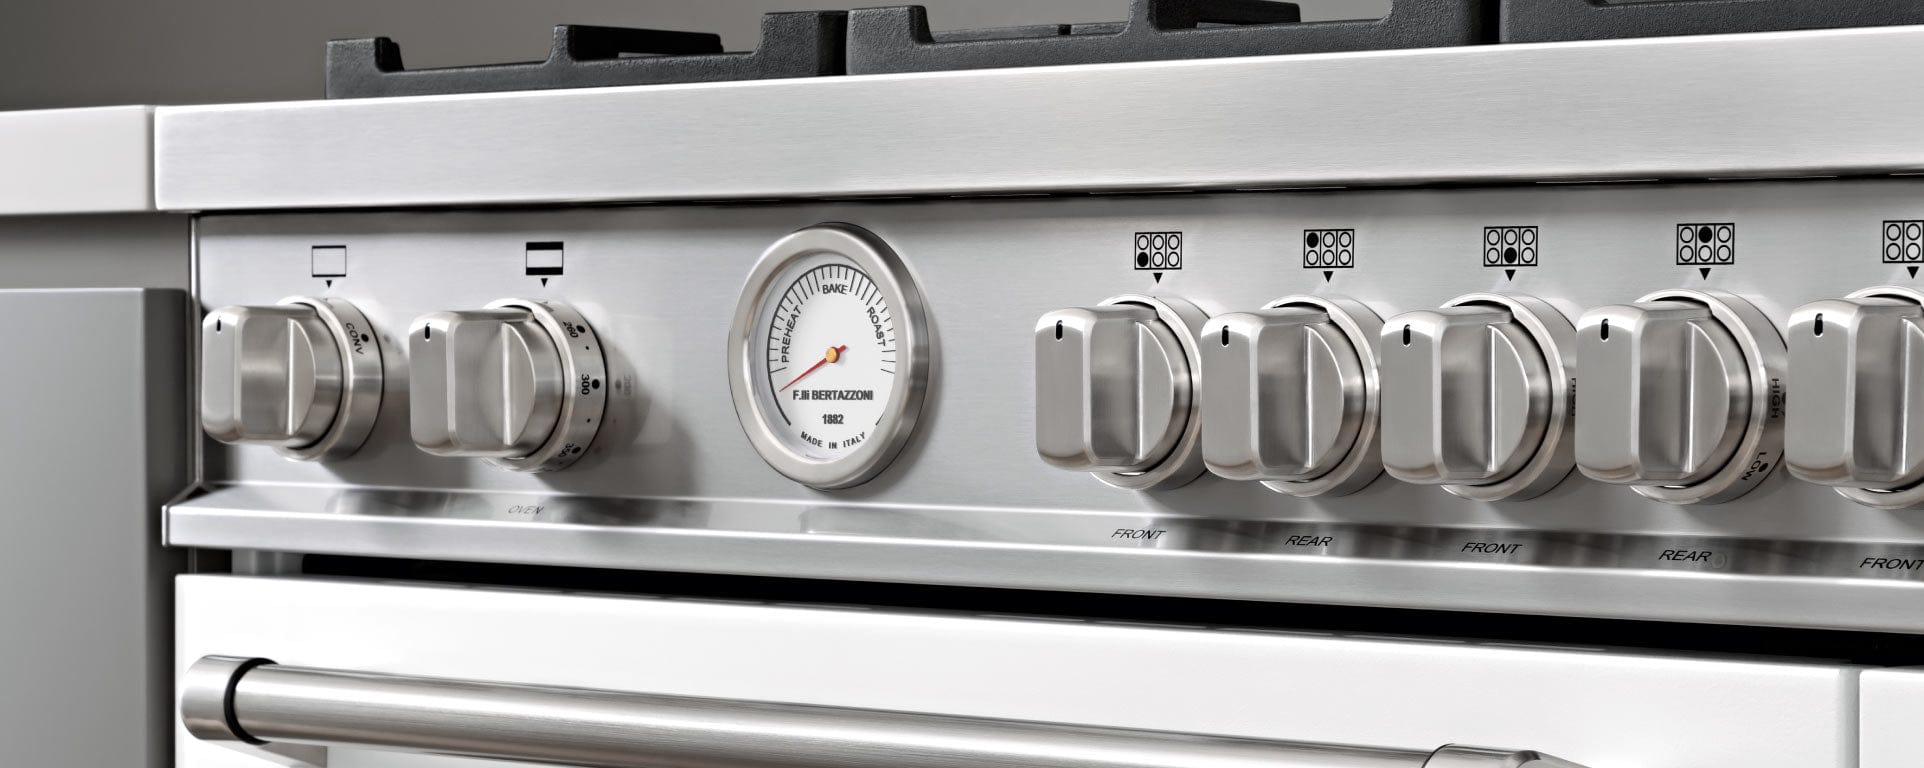 Bertazzoni Master Series 48" 6 Aluminum Burners Stainless Steel Freestanding Propane Gas Range With 7.1 Cu.Ft. Electric Manual Clean Double Oven and Griddle MAS486GDFMXV + CONVERSION Luxury Appliances Direct